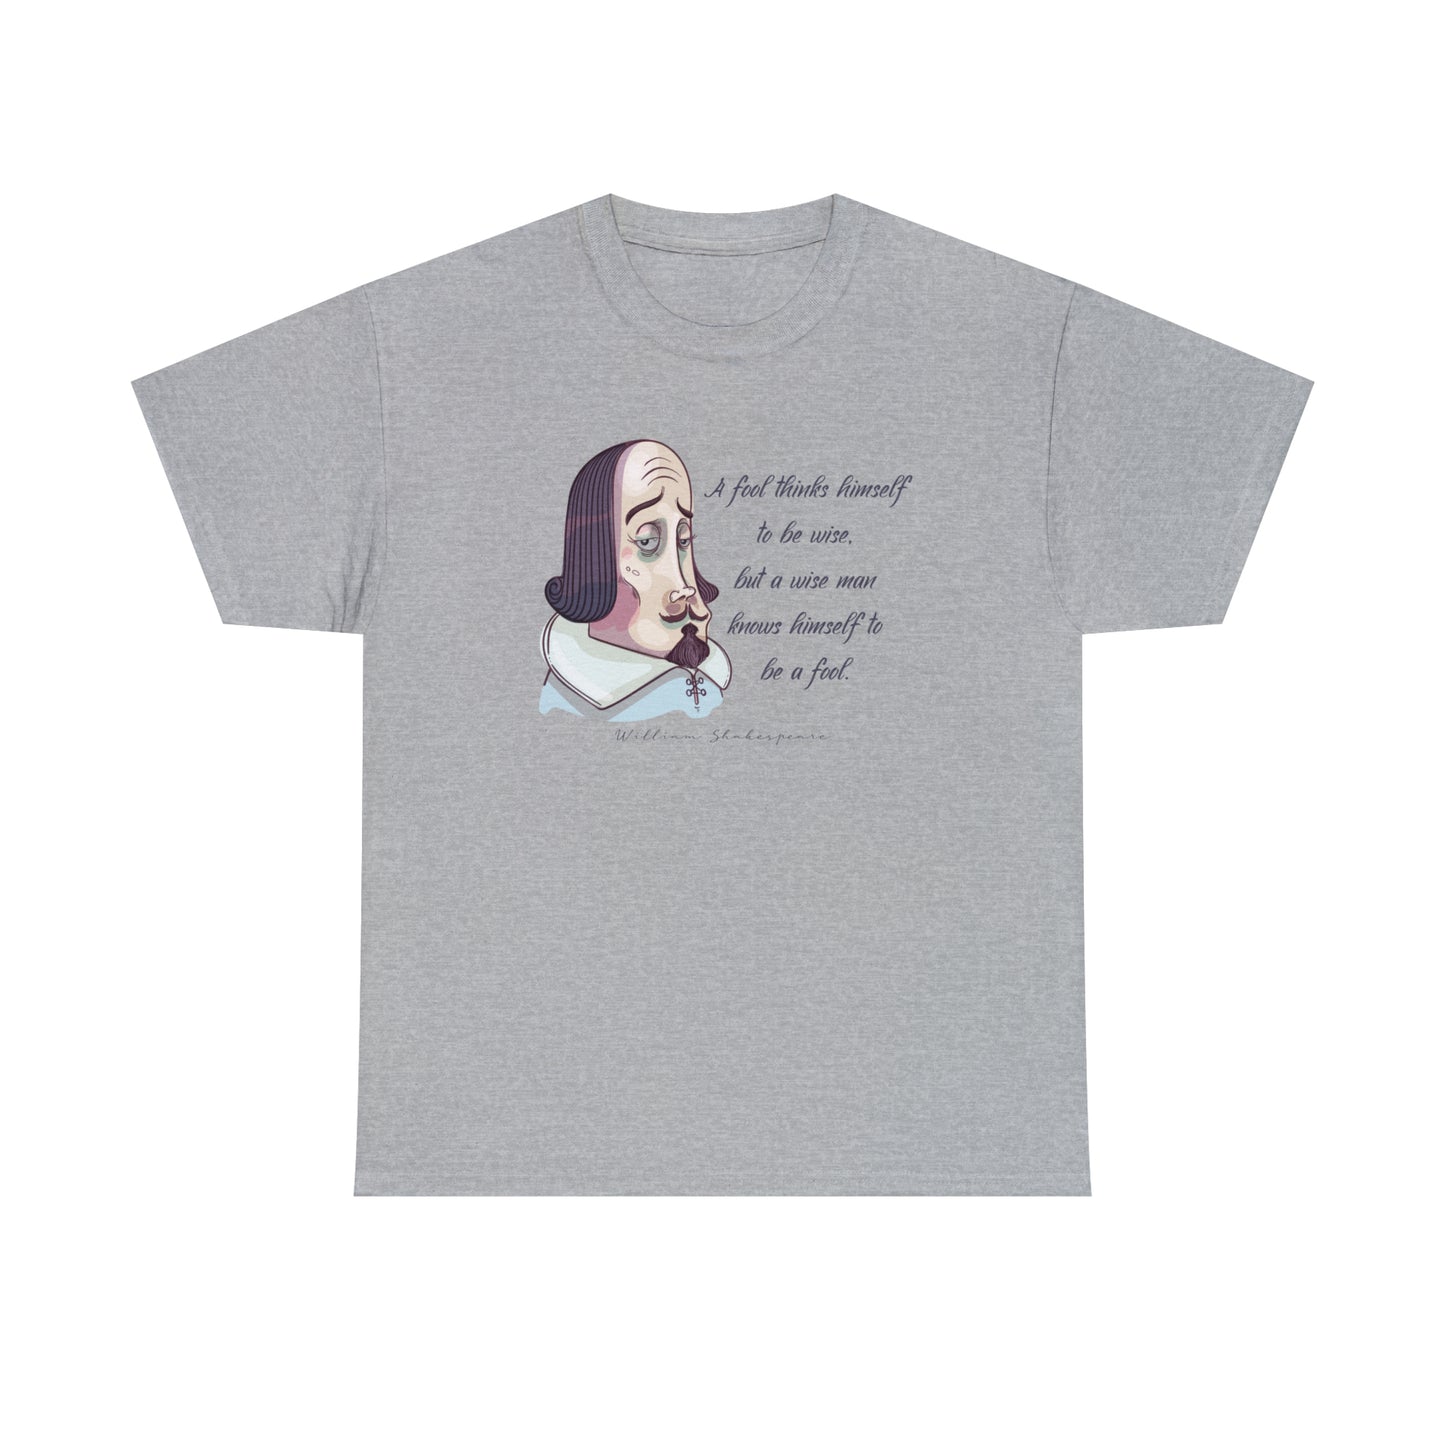 William Shakespeare T-Shirt With Shakespeare Quote TShirt For Fools T Shirt For Wise Man Shirt For Literary T-Shirt